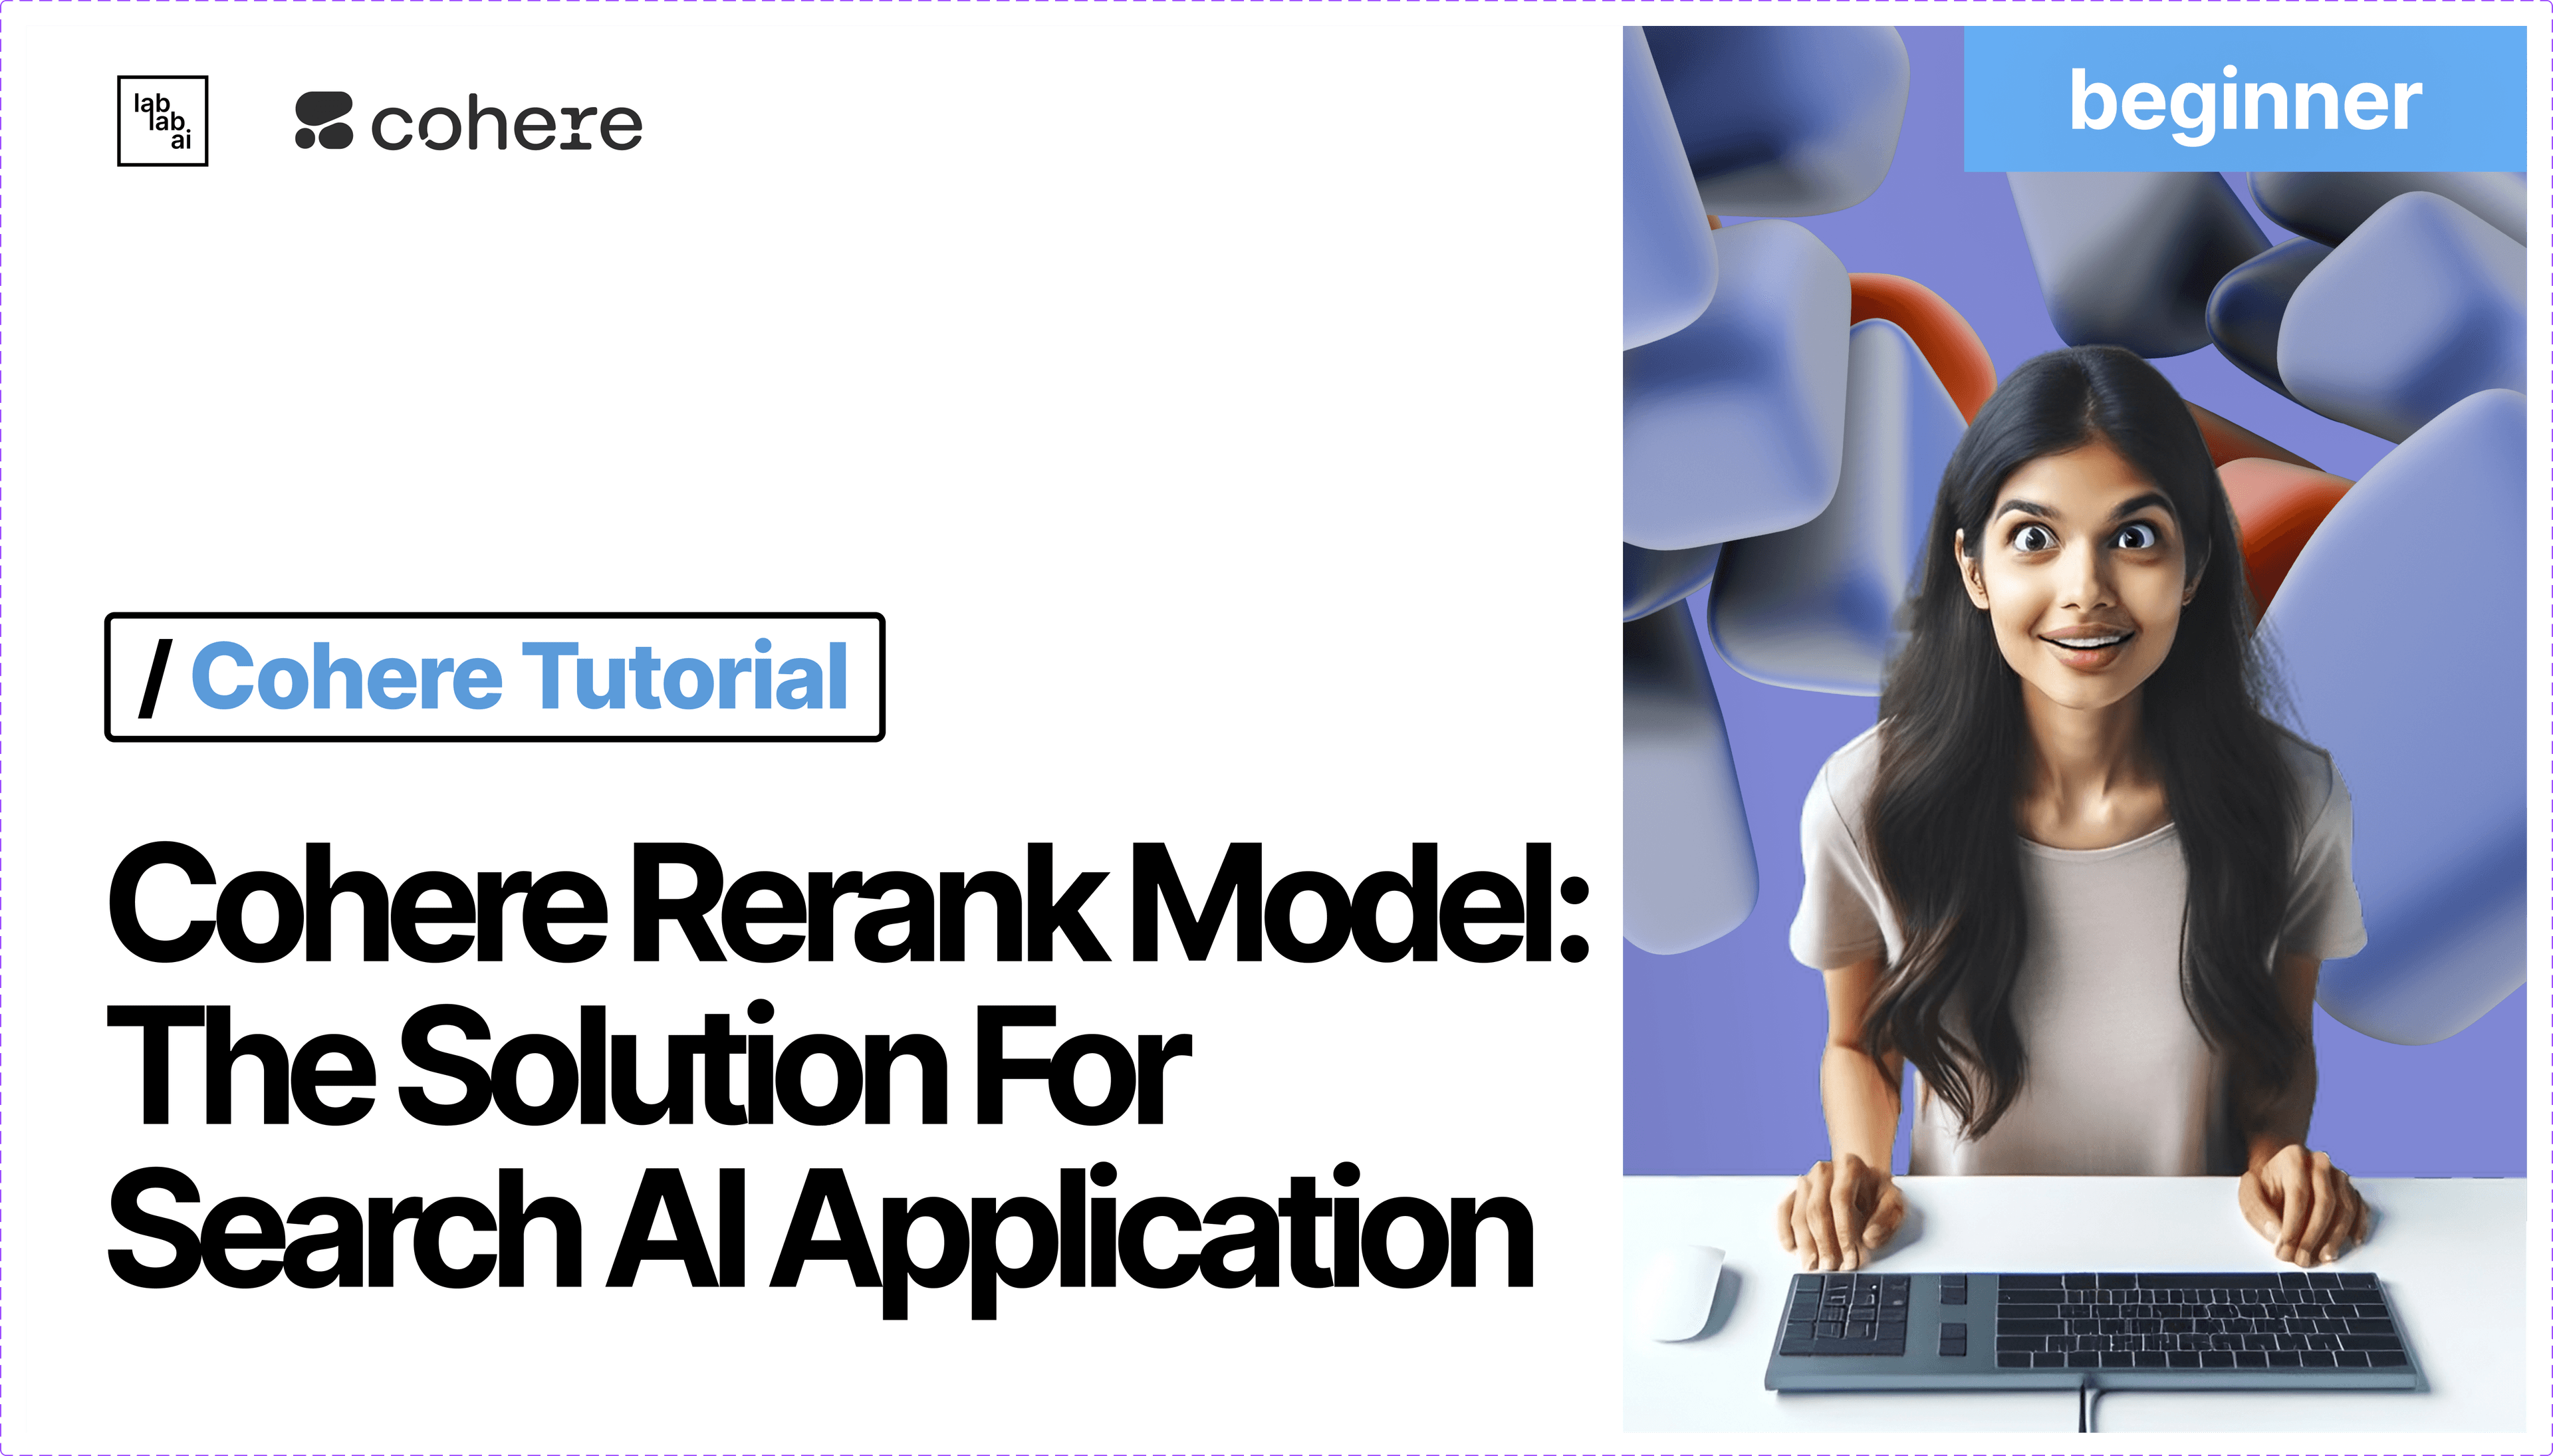 Cohere Rerank Model: The Solution For Search AI Application